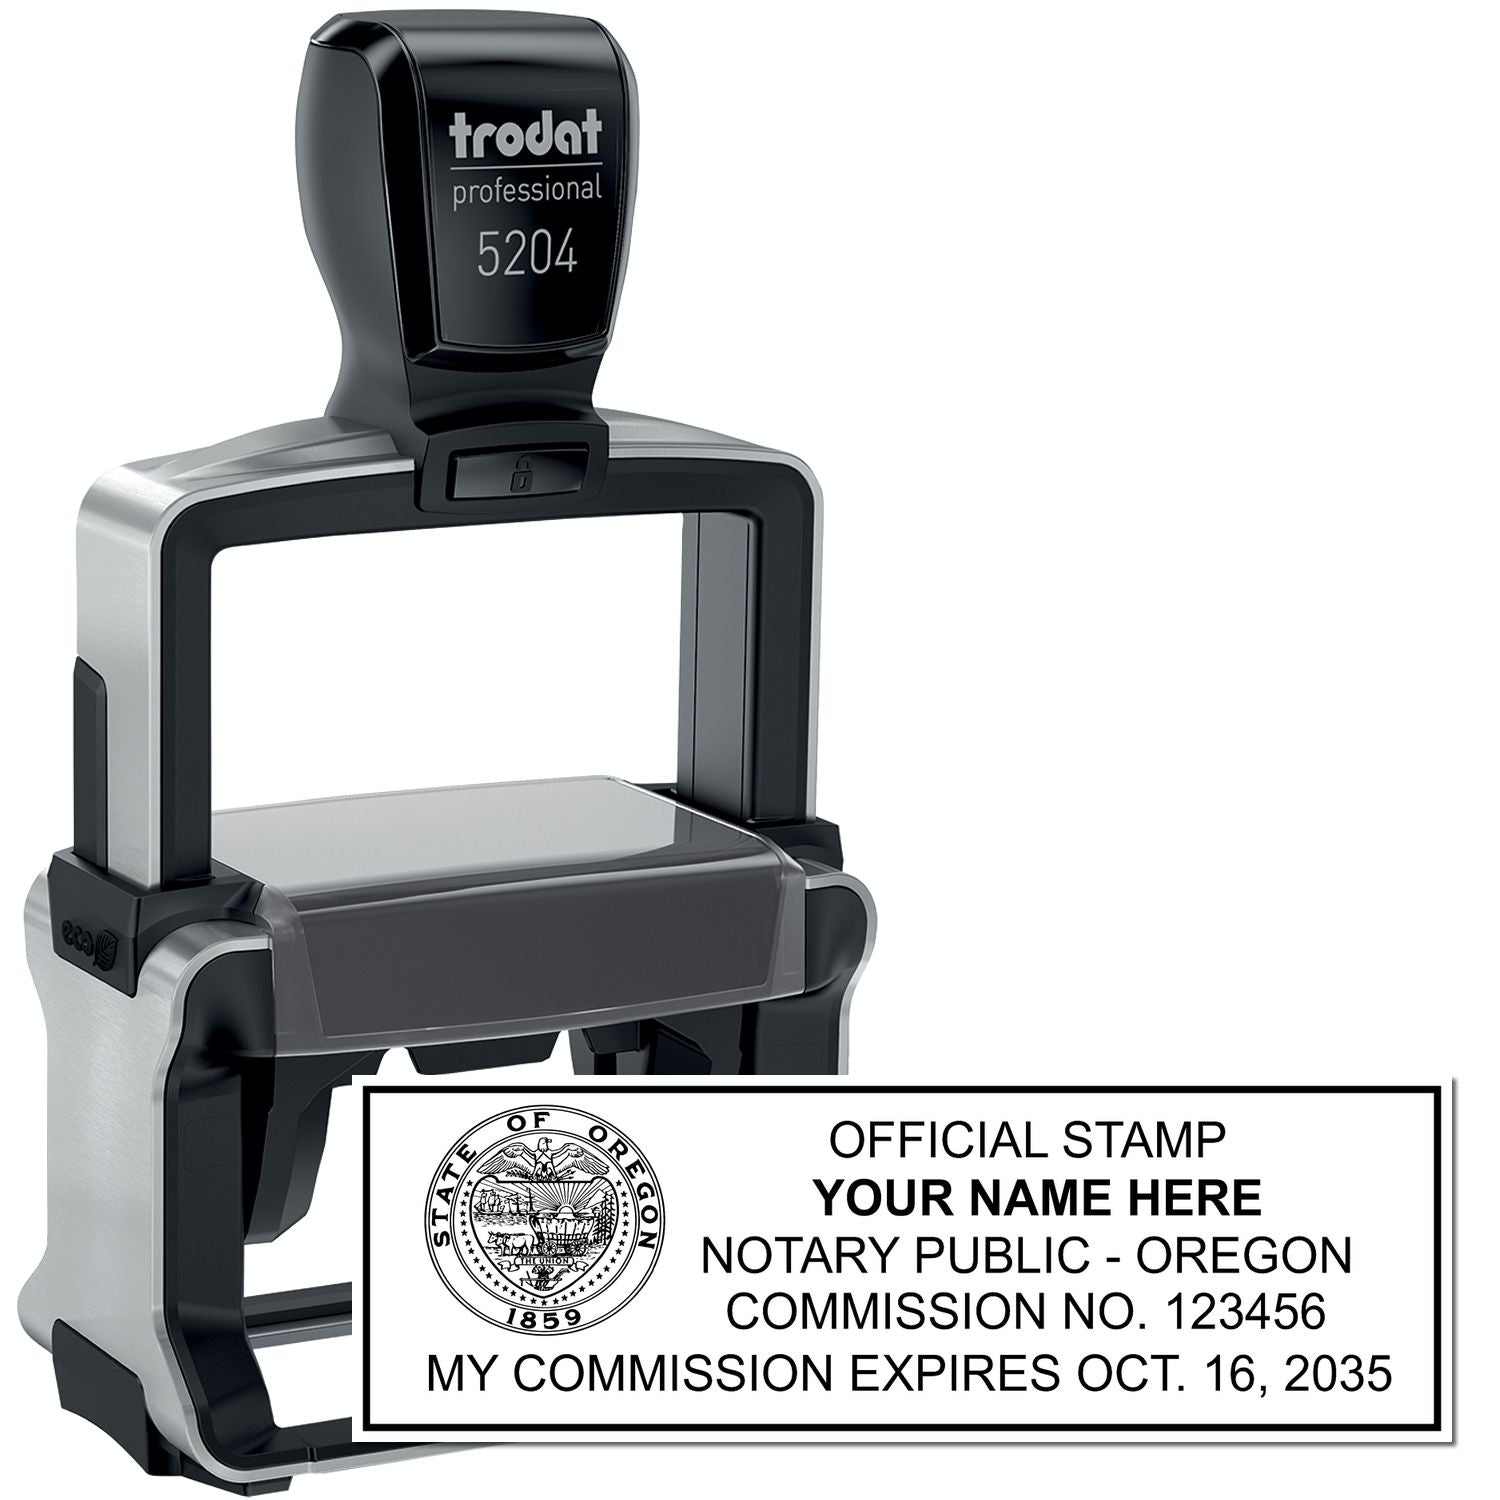 The main image for the Heavy-Duty Oregon Rectangular Notary Stamp depicting a sample of the imprint and electronic files